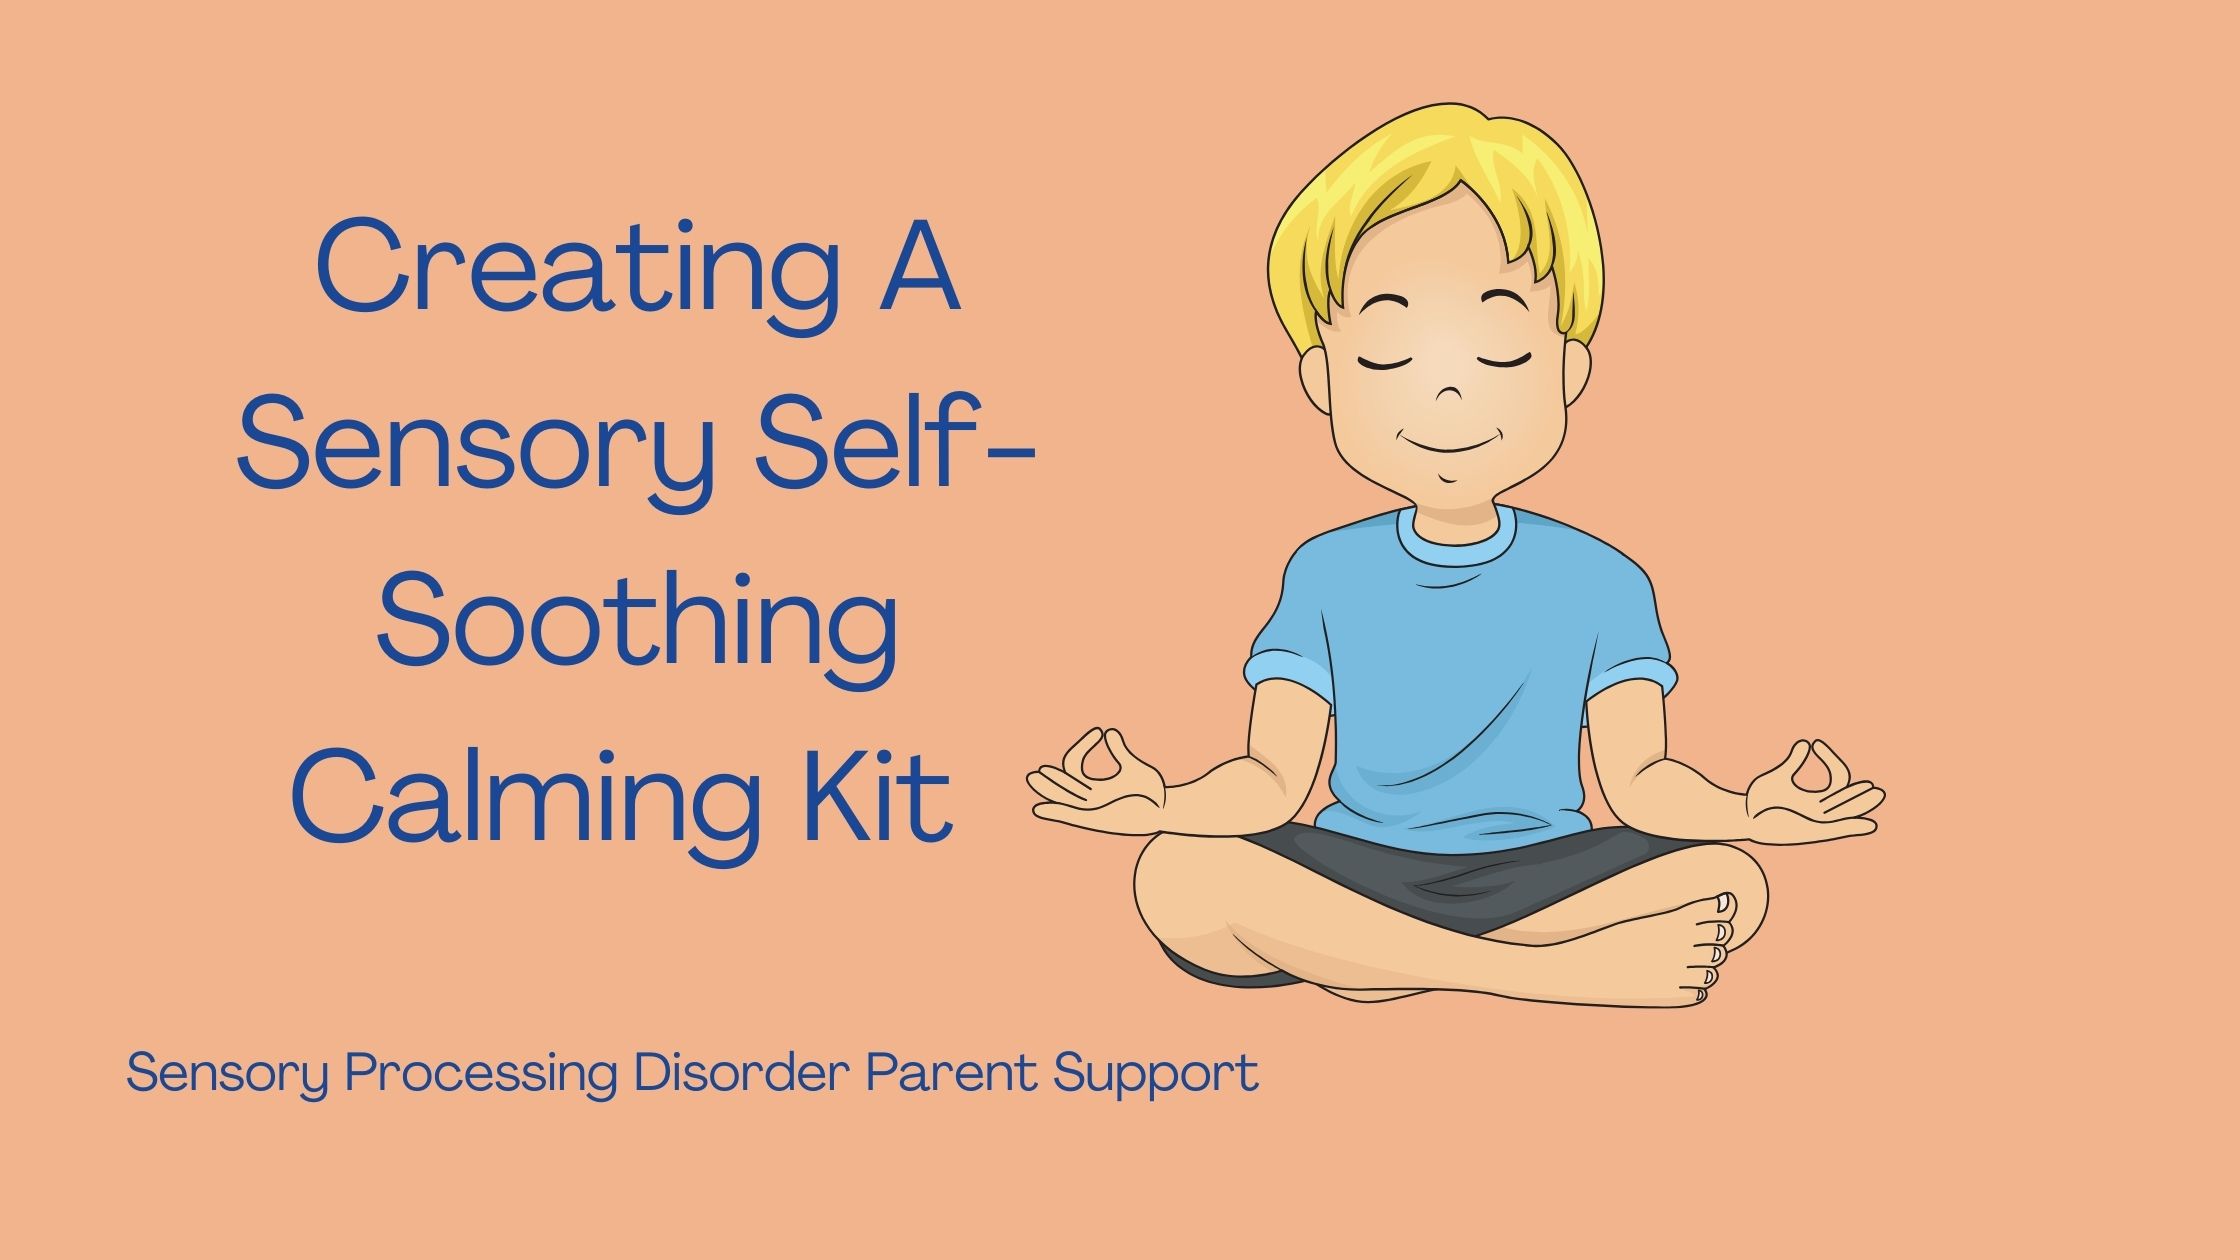 child with sensory differences feeling calm Creating A Sensory Self- Soothing Calming Kit sensory processing disorder